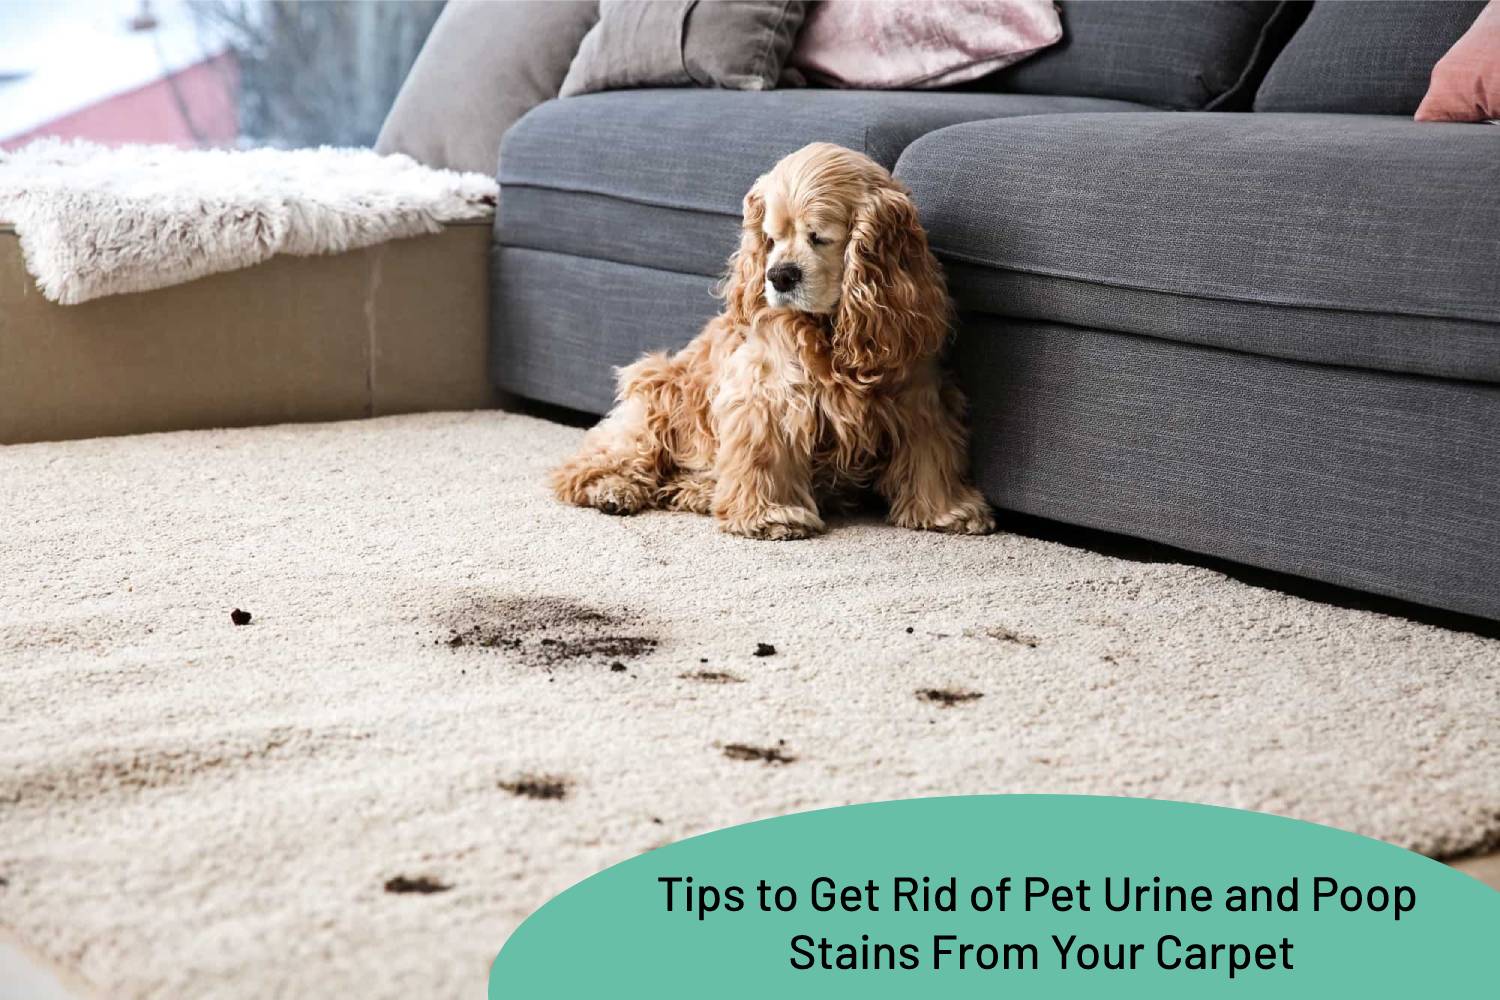 Tips To Get Rid Of Pet Urine And Poop Stains From Your Carpet - My